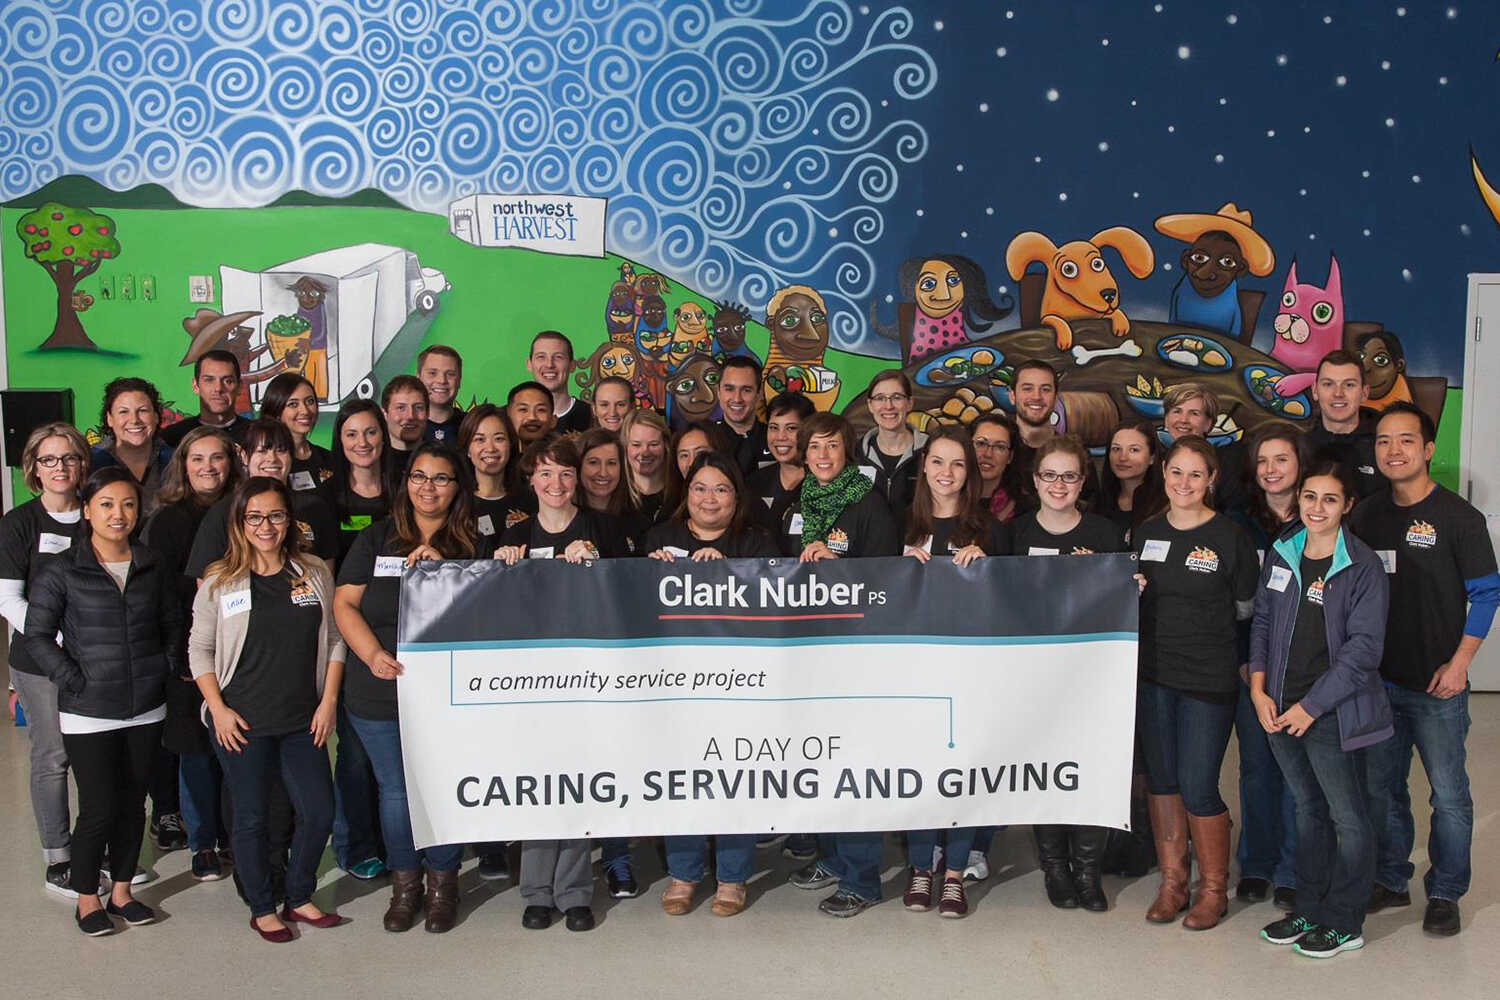 Employees-Centric Culture Makes Clark Nuber PS A Sustainable Success-Image#1